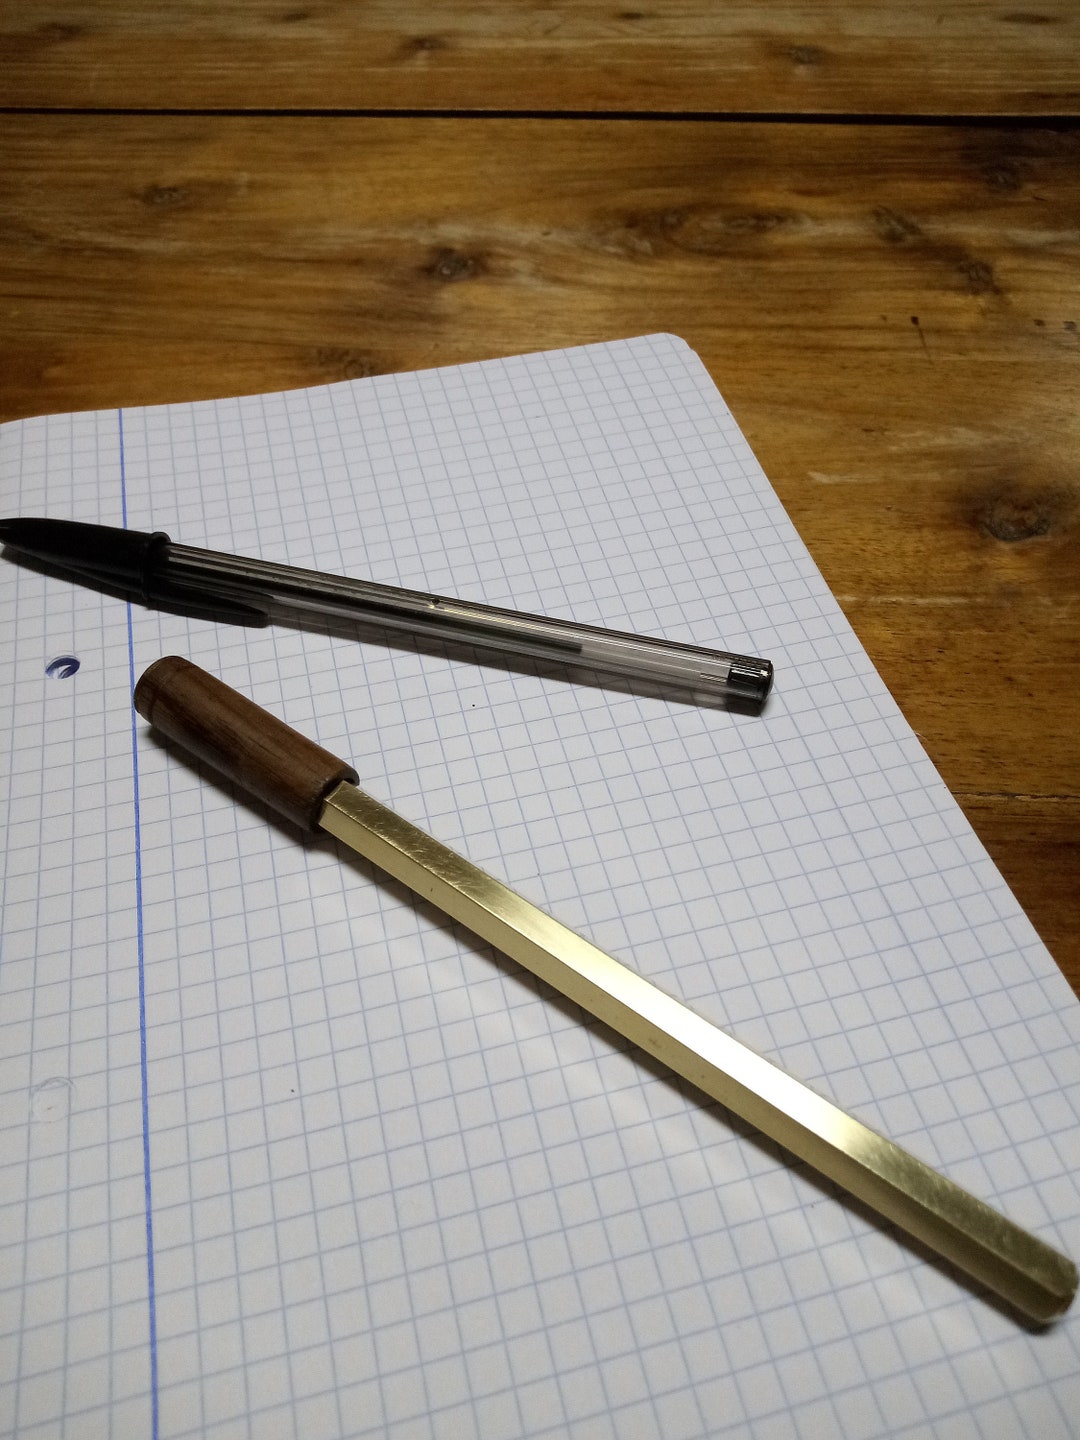 Bic Cristal Mexican Market ballpoint products review Part 4 of 4 